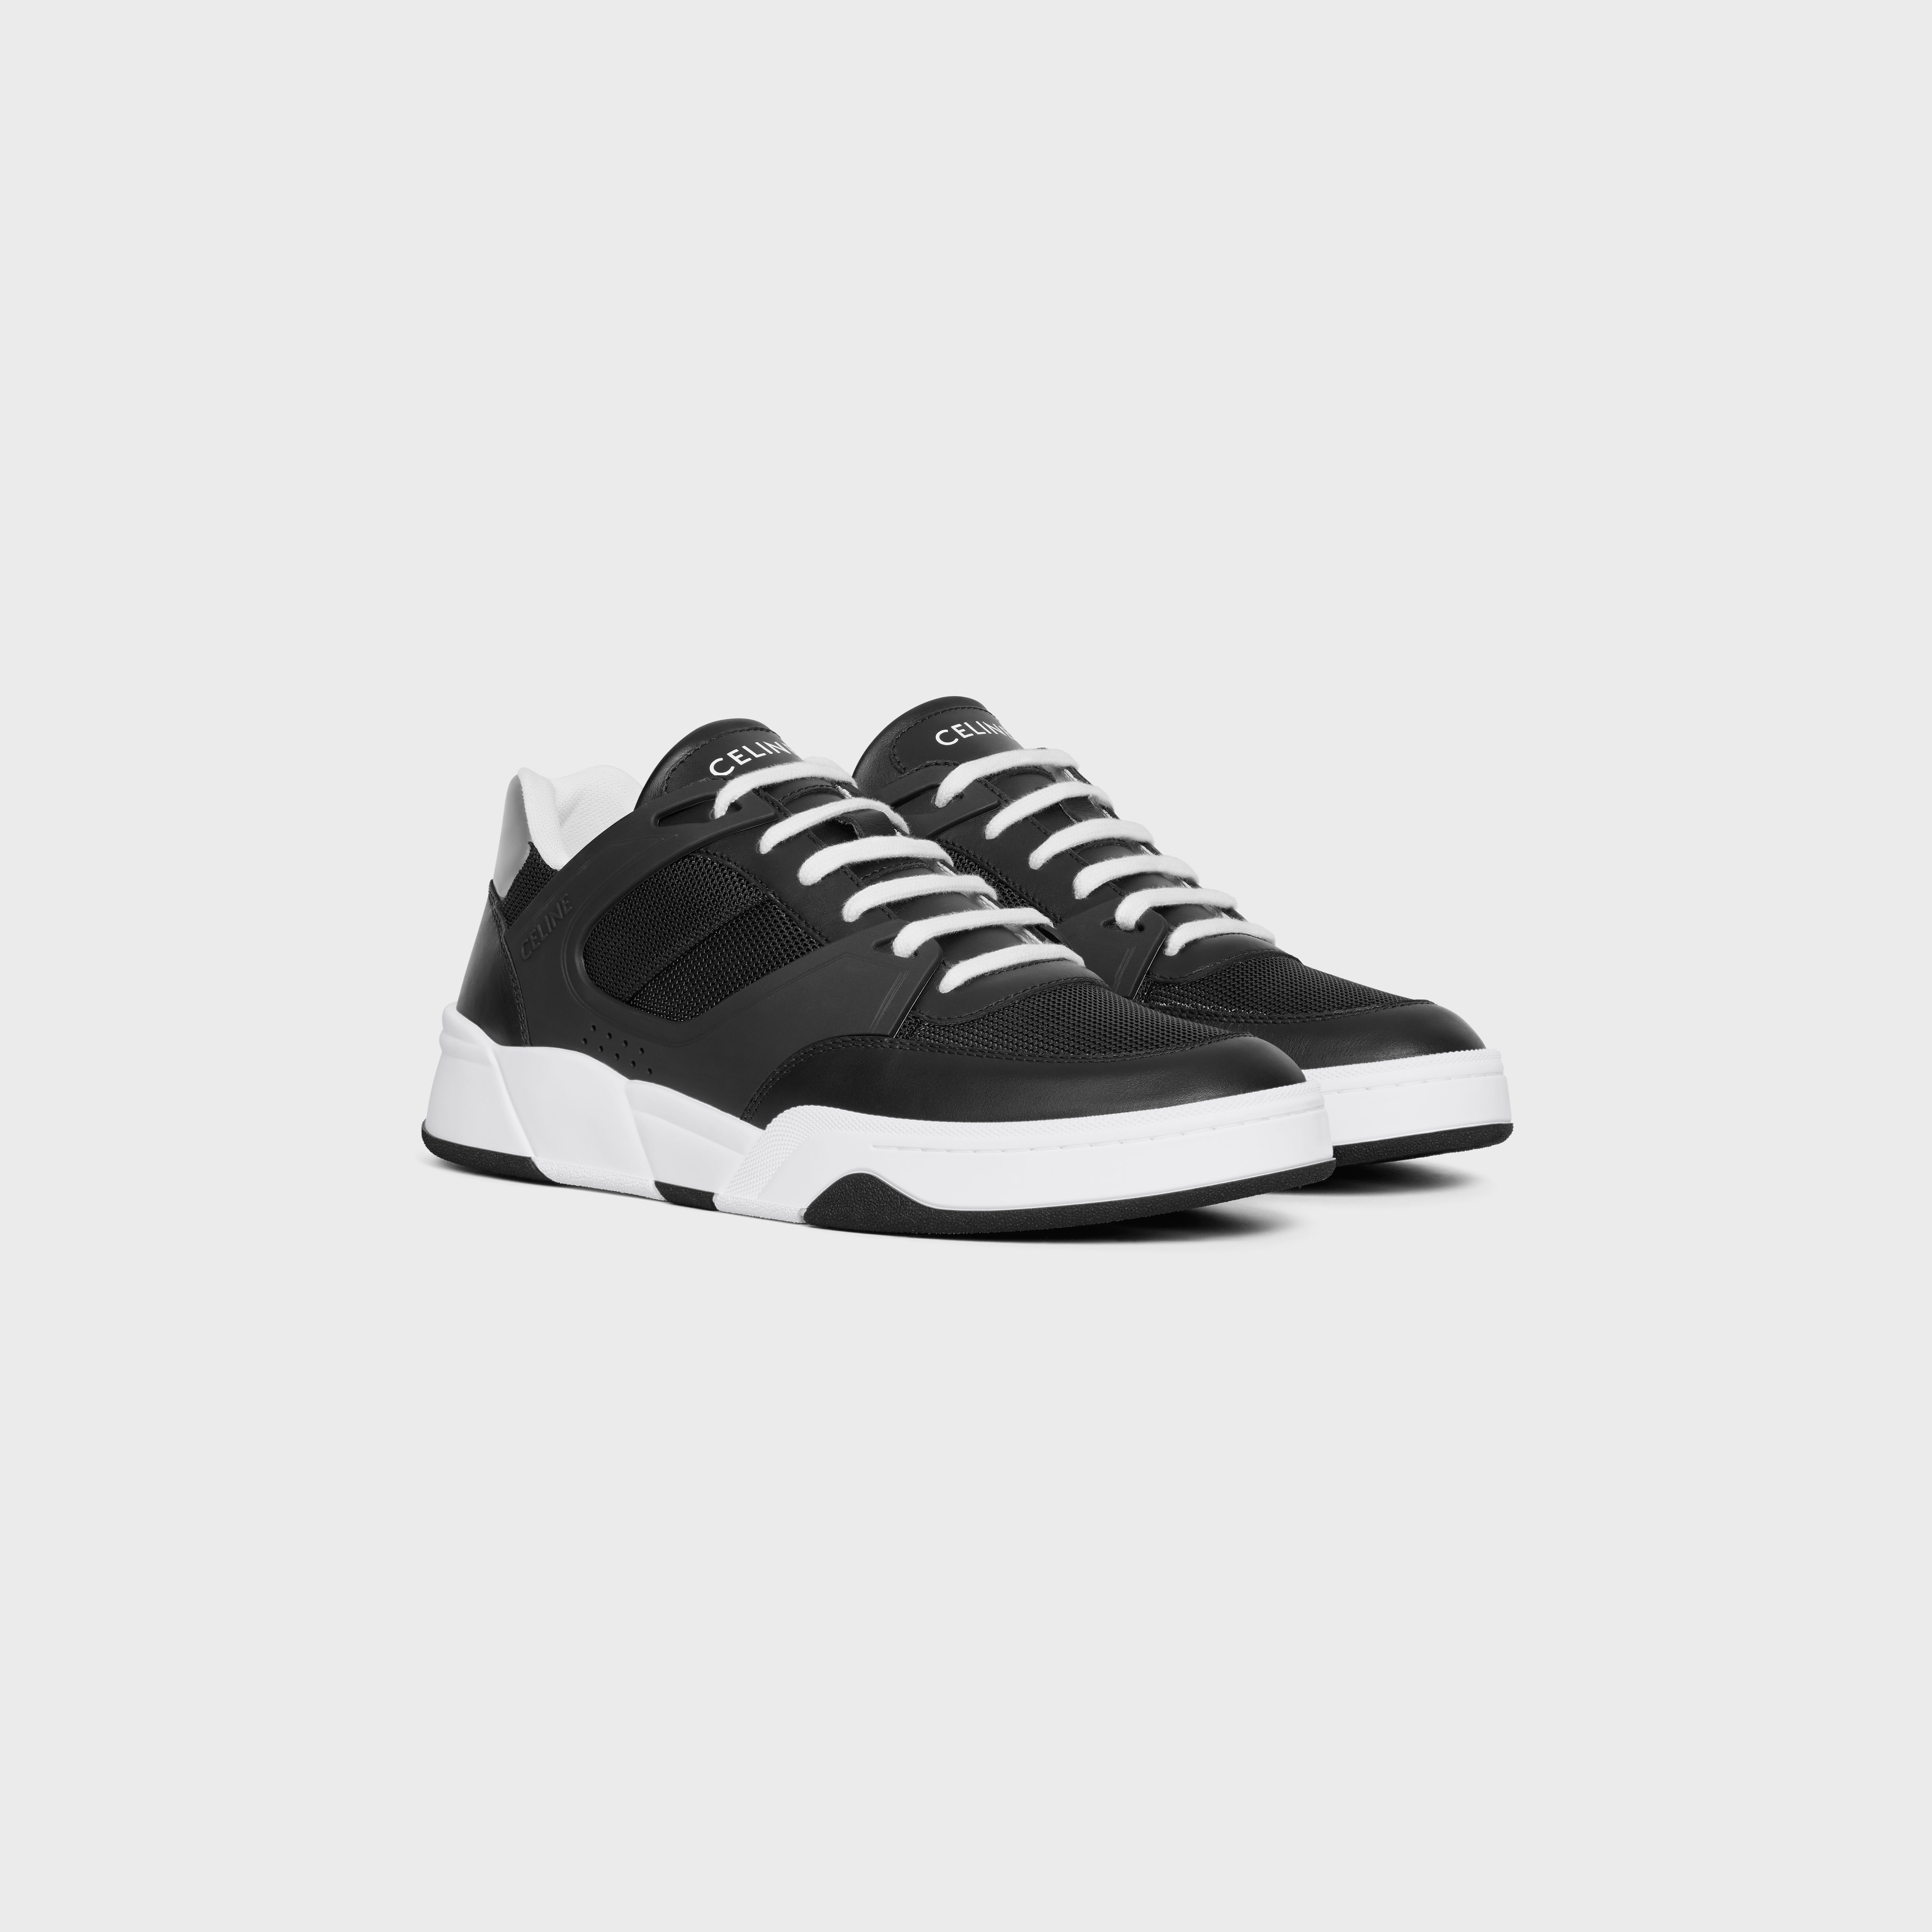 CELINE TRAINER CT-07 LOW LACE-UP SNEAKER in Mesh, Calfskin AND Laminated Calfskin - 2